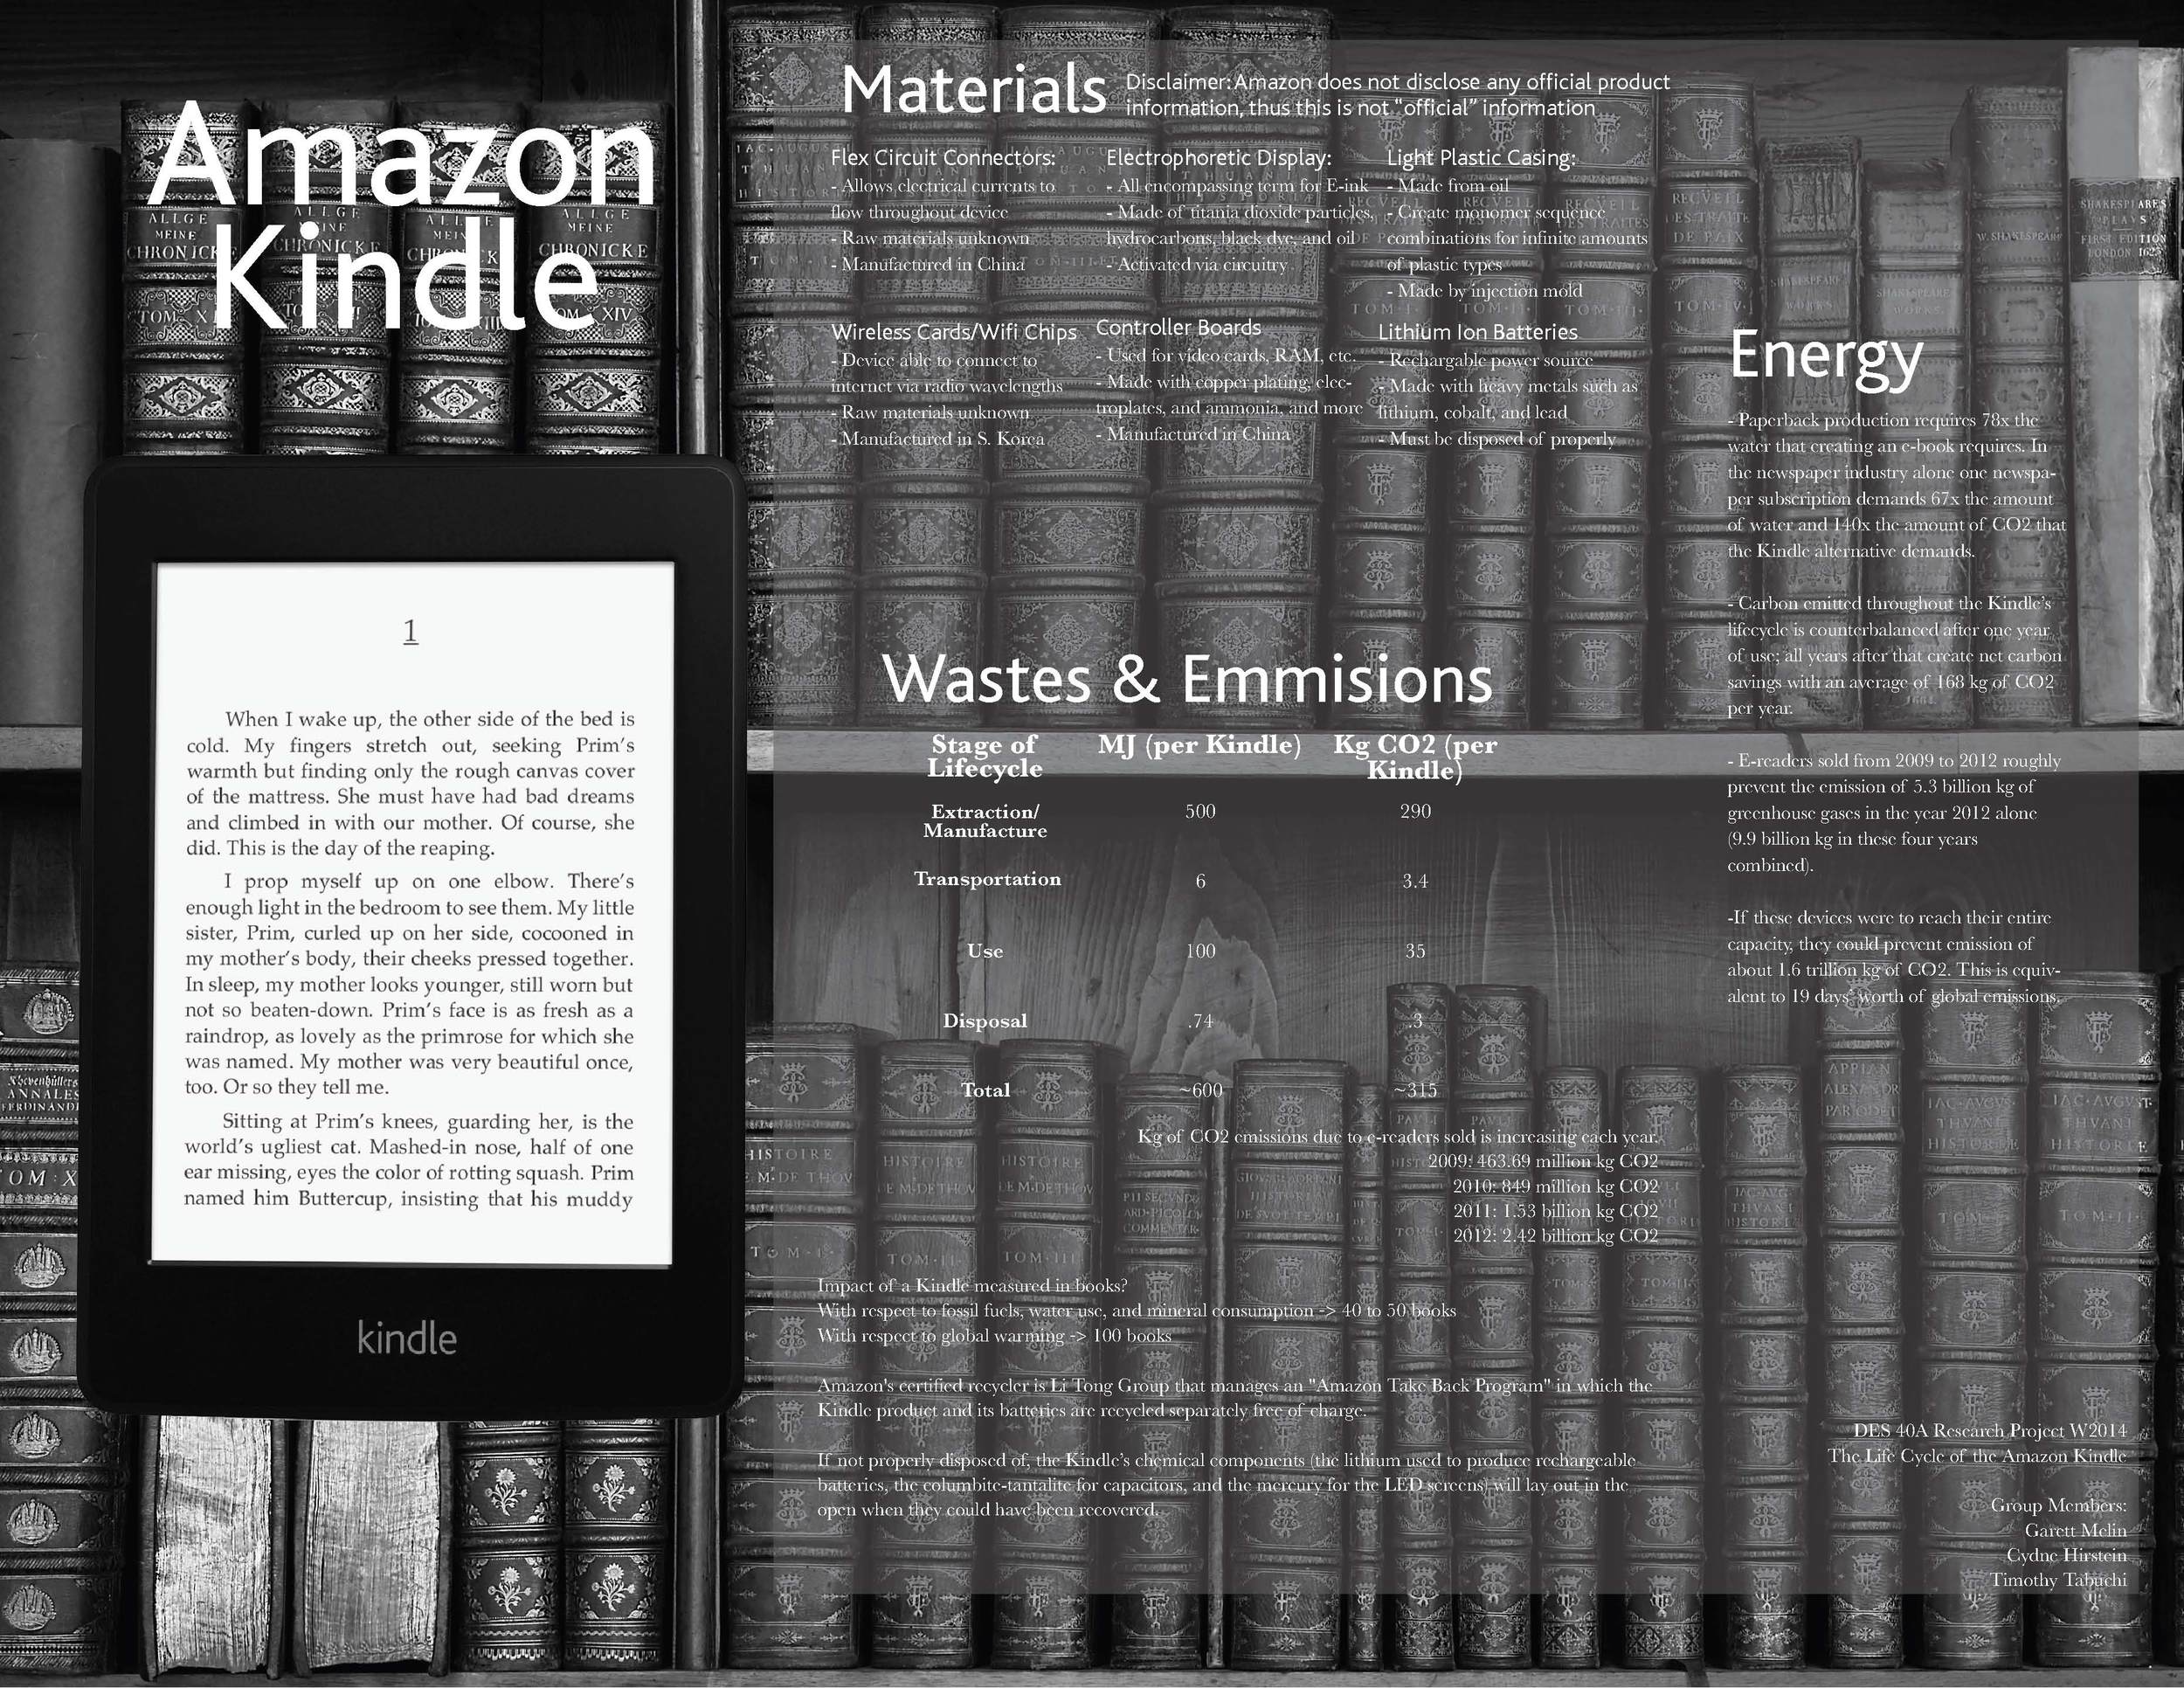 finally supports Traditional Chinese books on Kindle